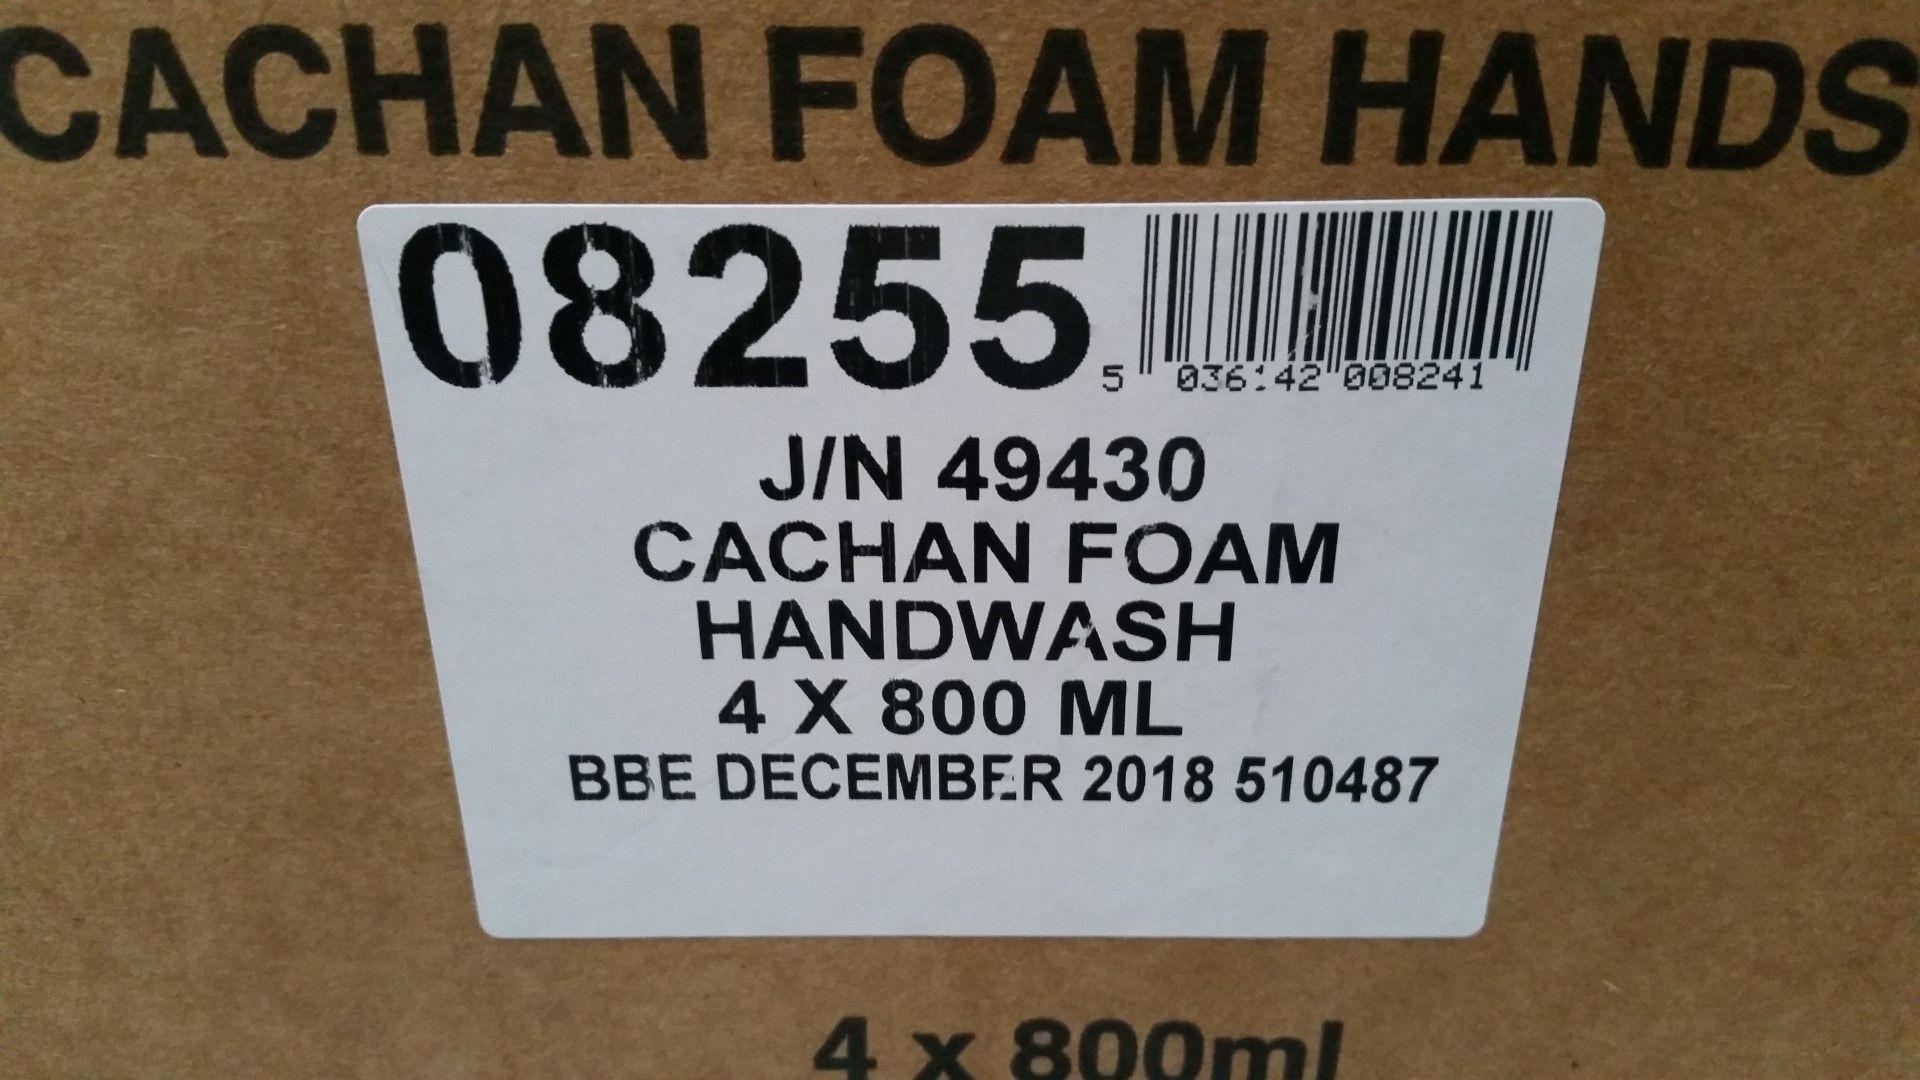 12 x Cachan Foam 800ml Handwash - Suitable For Foaming Dispnesers - Expiry December 2018 - New Boxed - Image 2 of 5